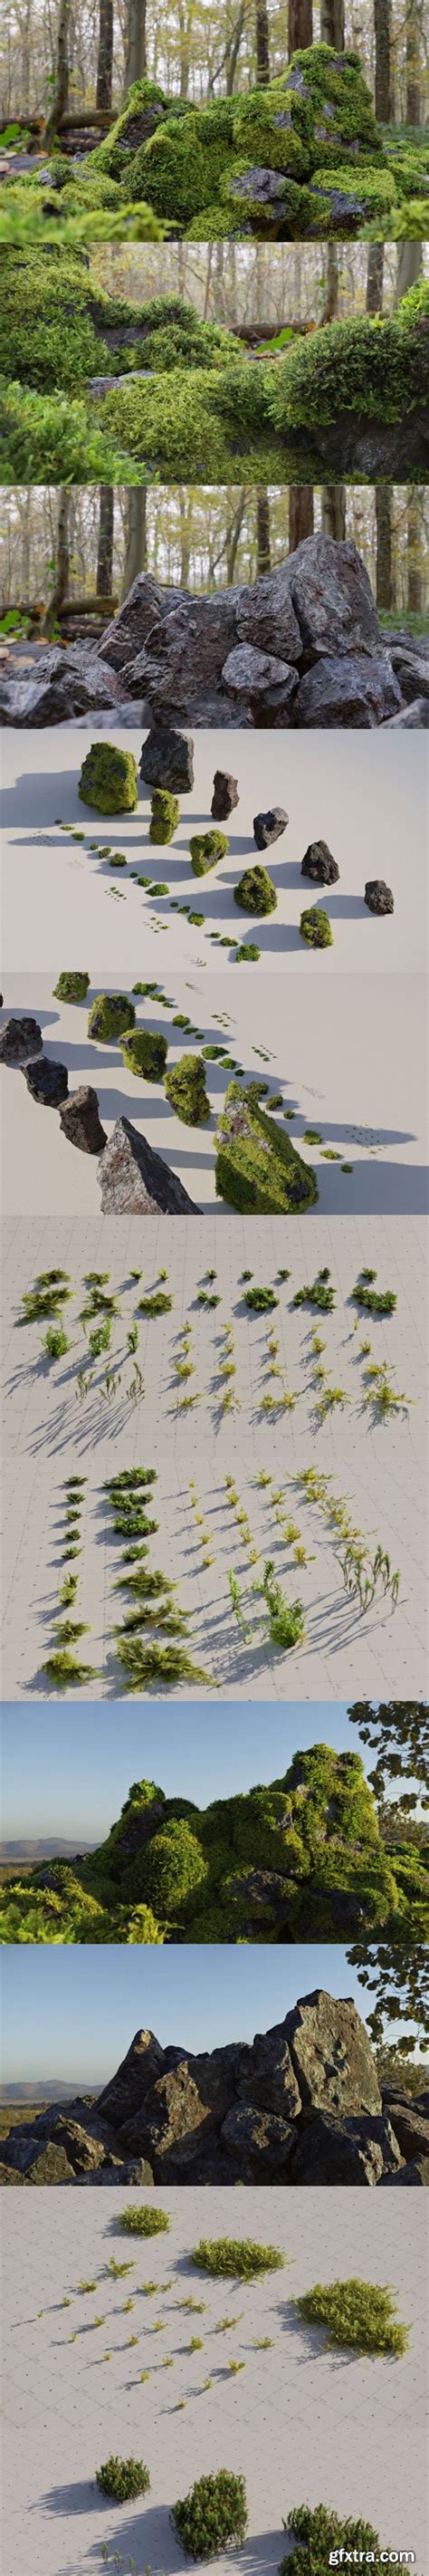 Cgtrader Moss 7 Species And Stones Pbr Asset Kit Vr Ar Low Poly